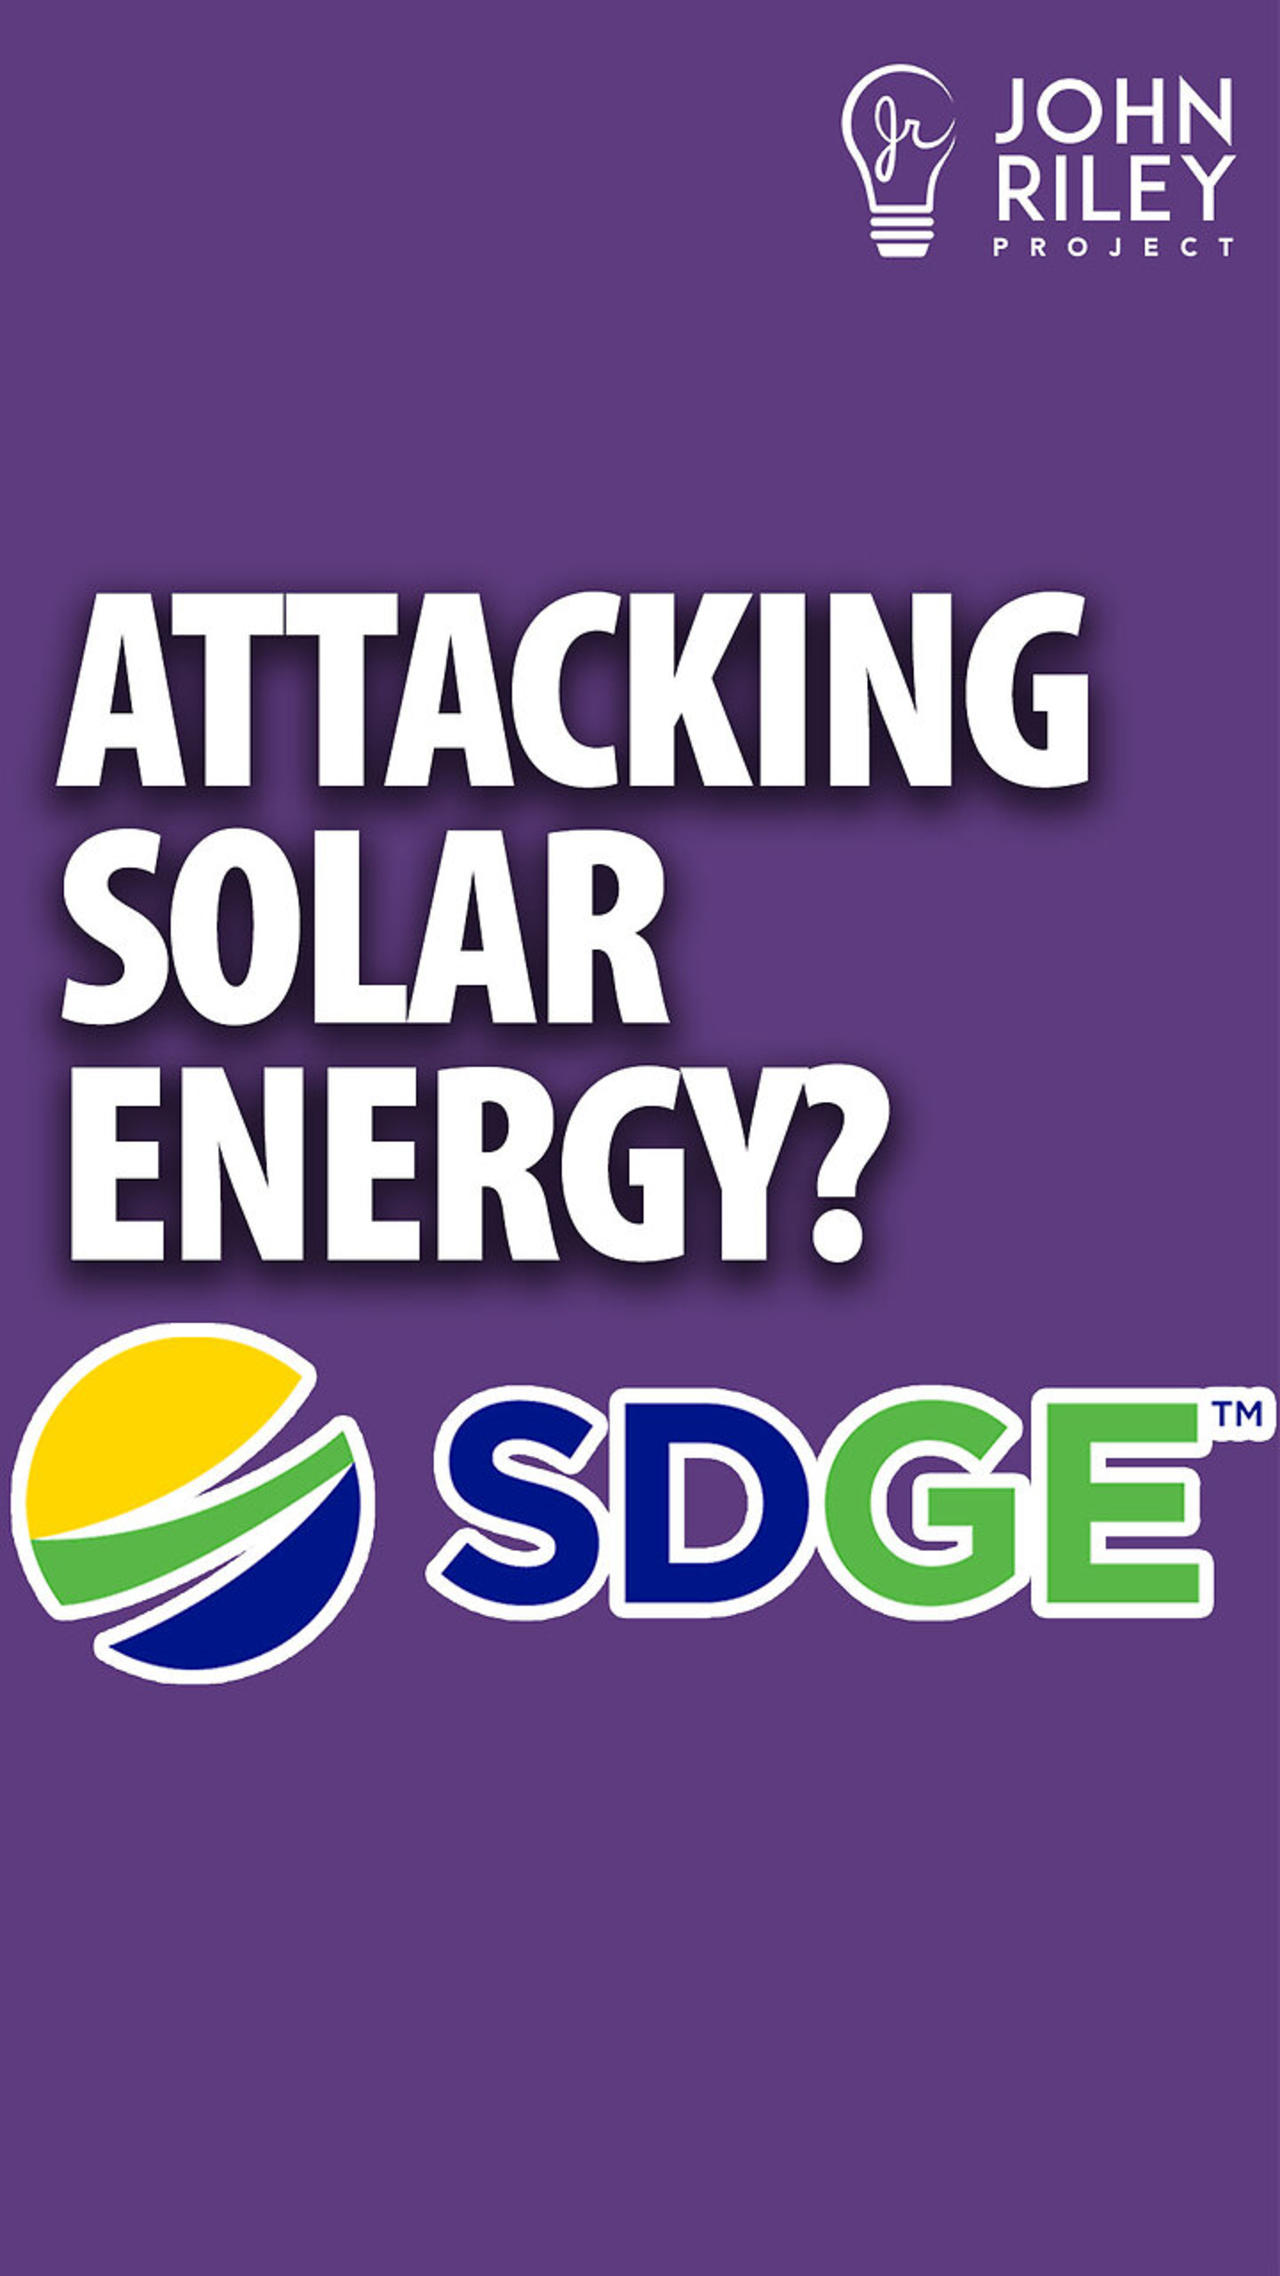 San Diego Gas & Electric to set rates based on your income. It's a response to solar energy.